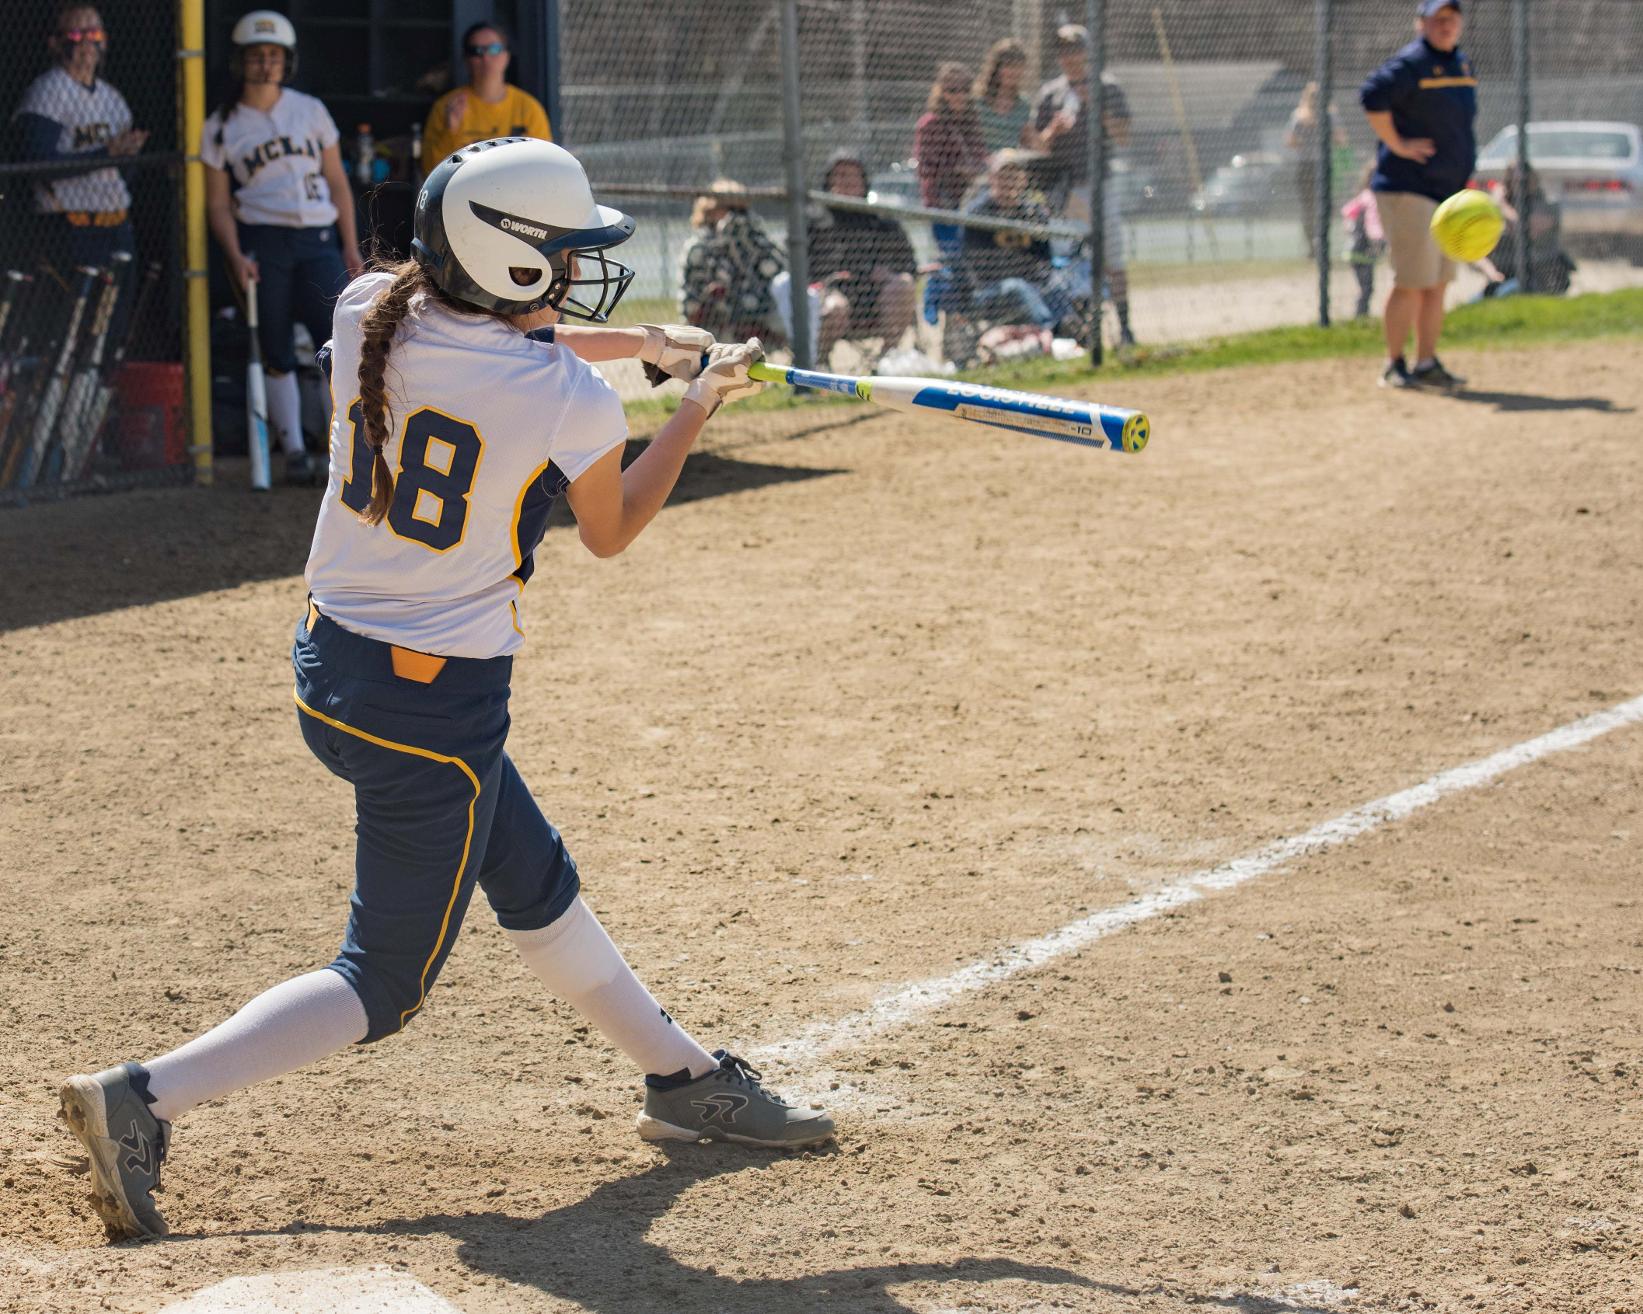 Softball swept by Bridgewater in MASCAC play at home 5-1, 8-0